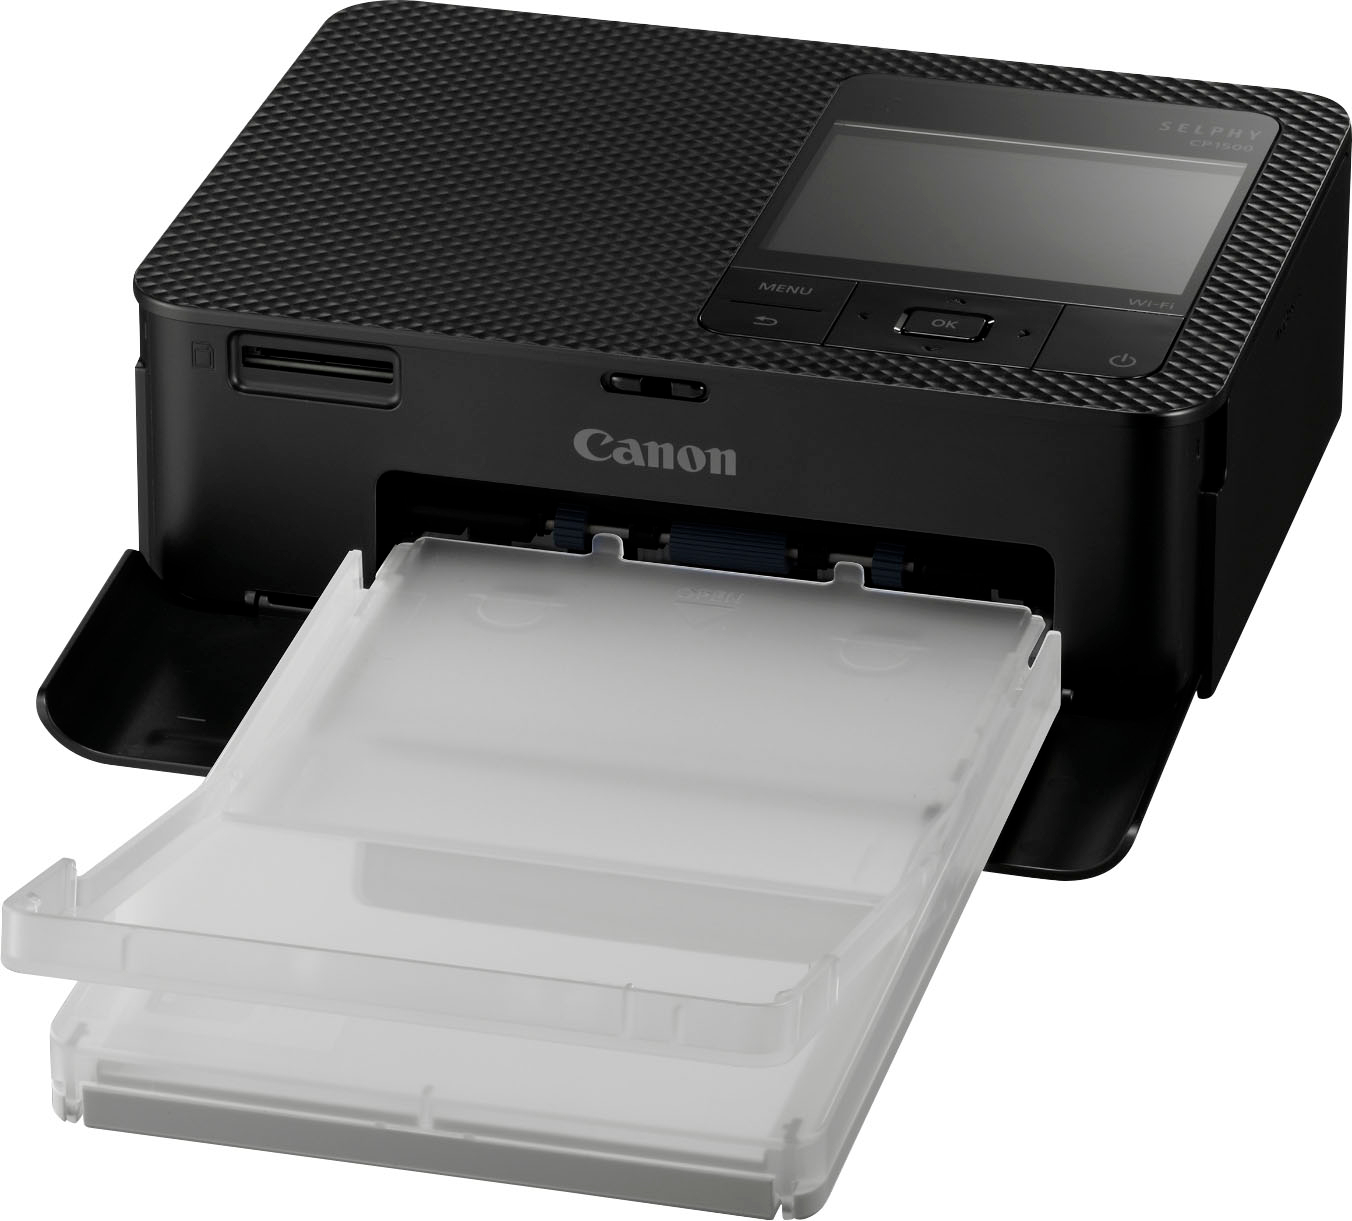 Canon SELPHY CP1300 Wireless Compact Photo Printer White 2235C001 - Best Buy